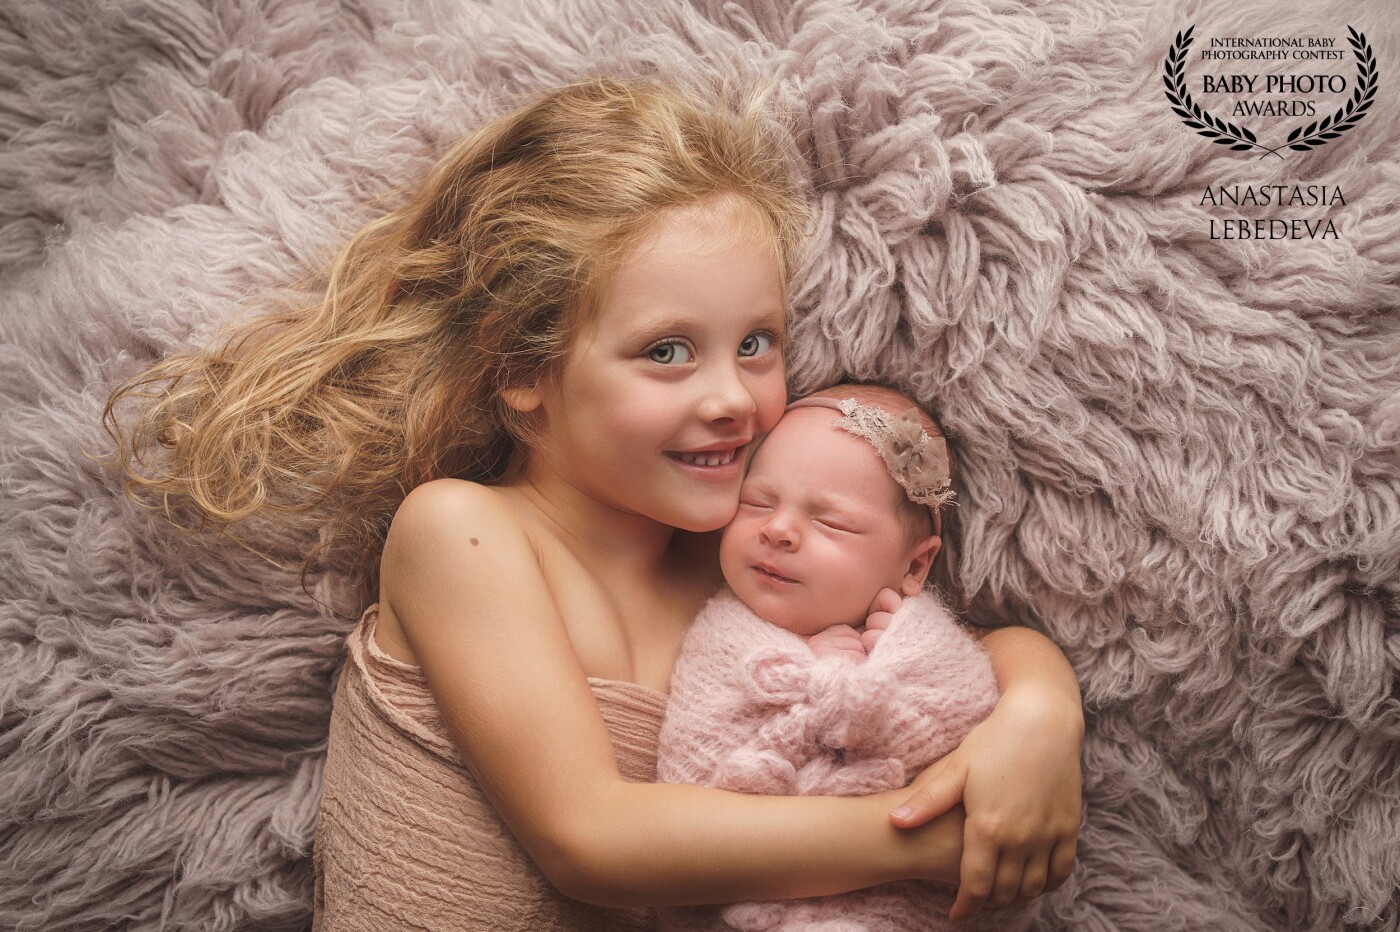 There are two lovely sisters in this photo.  The eldest is insanely happy with the appearance of a newborn sister, her eyes are filled with love and tenderness.  I really love this photo.